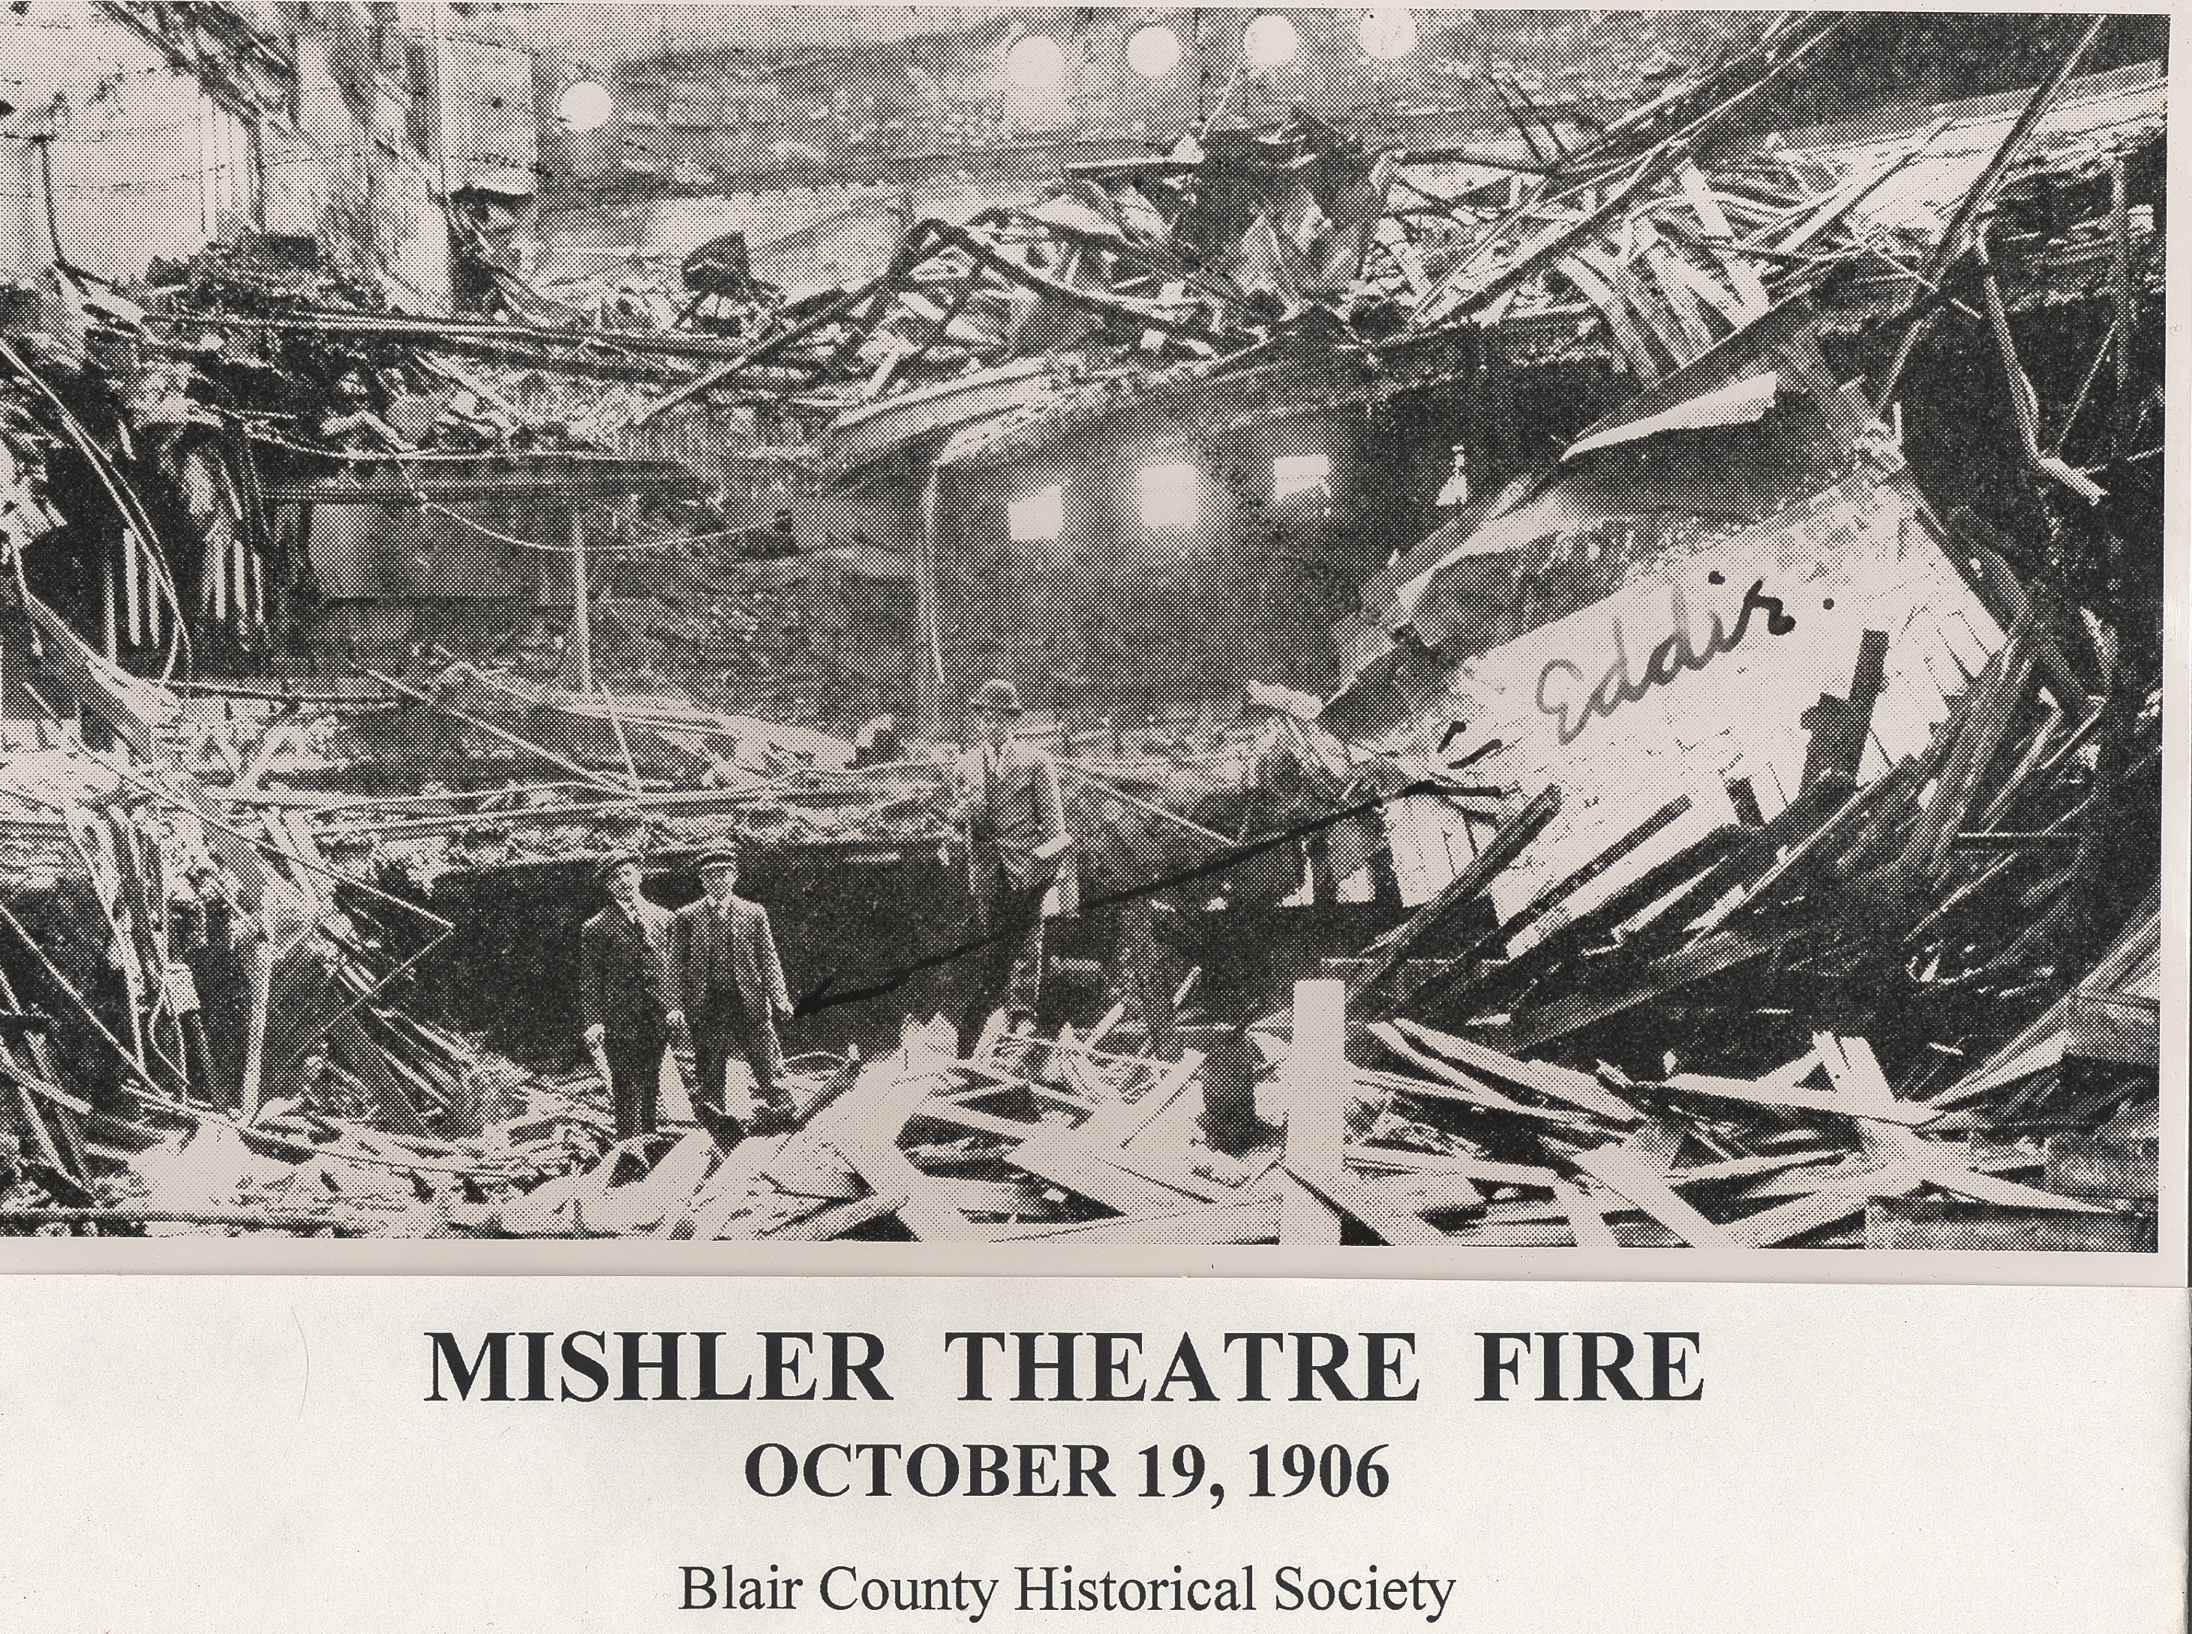 The Mishler Theatre shortly after the fire